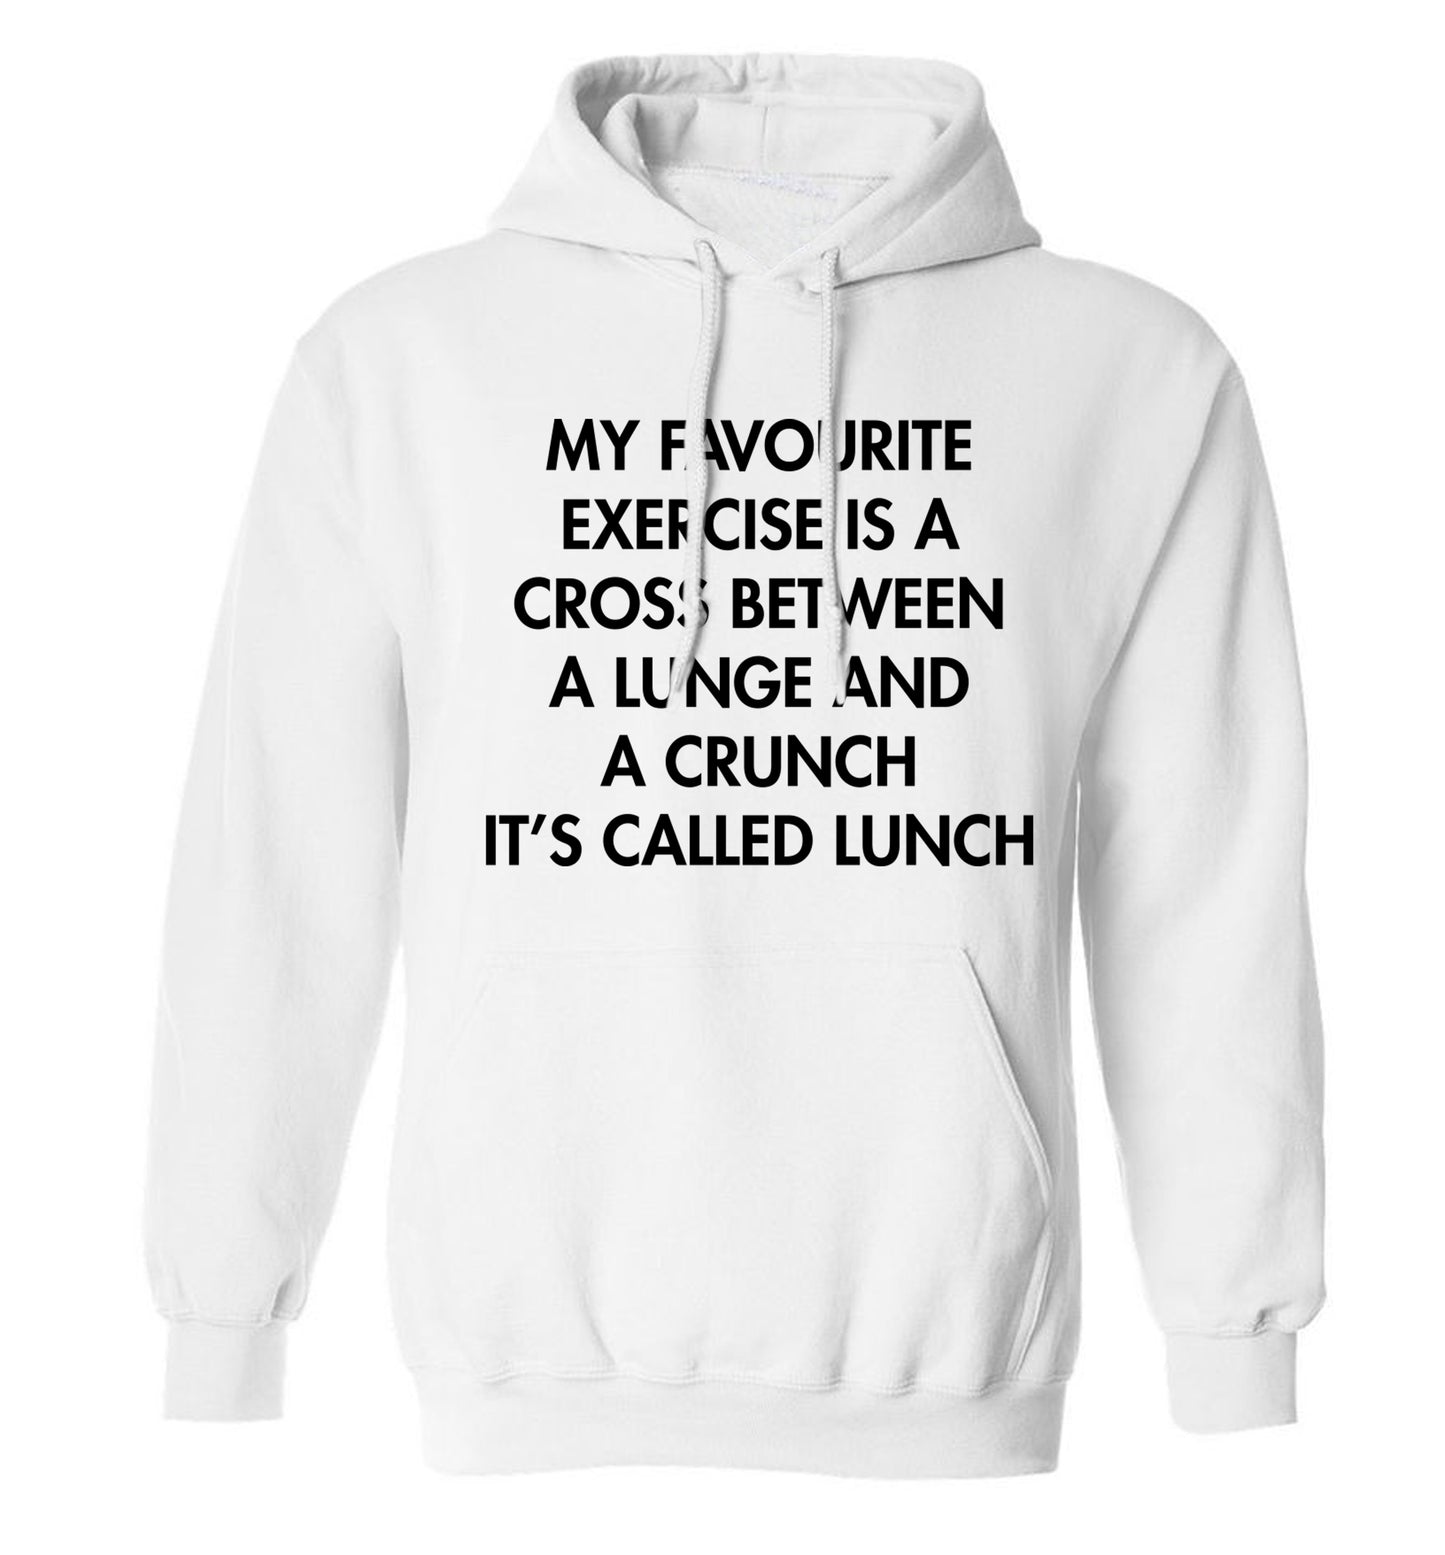 My favourite exercise is a cross between a lung and a crunch it's called lunch adults unisex white hoodie 2XL